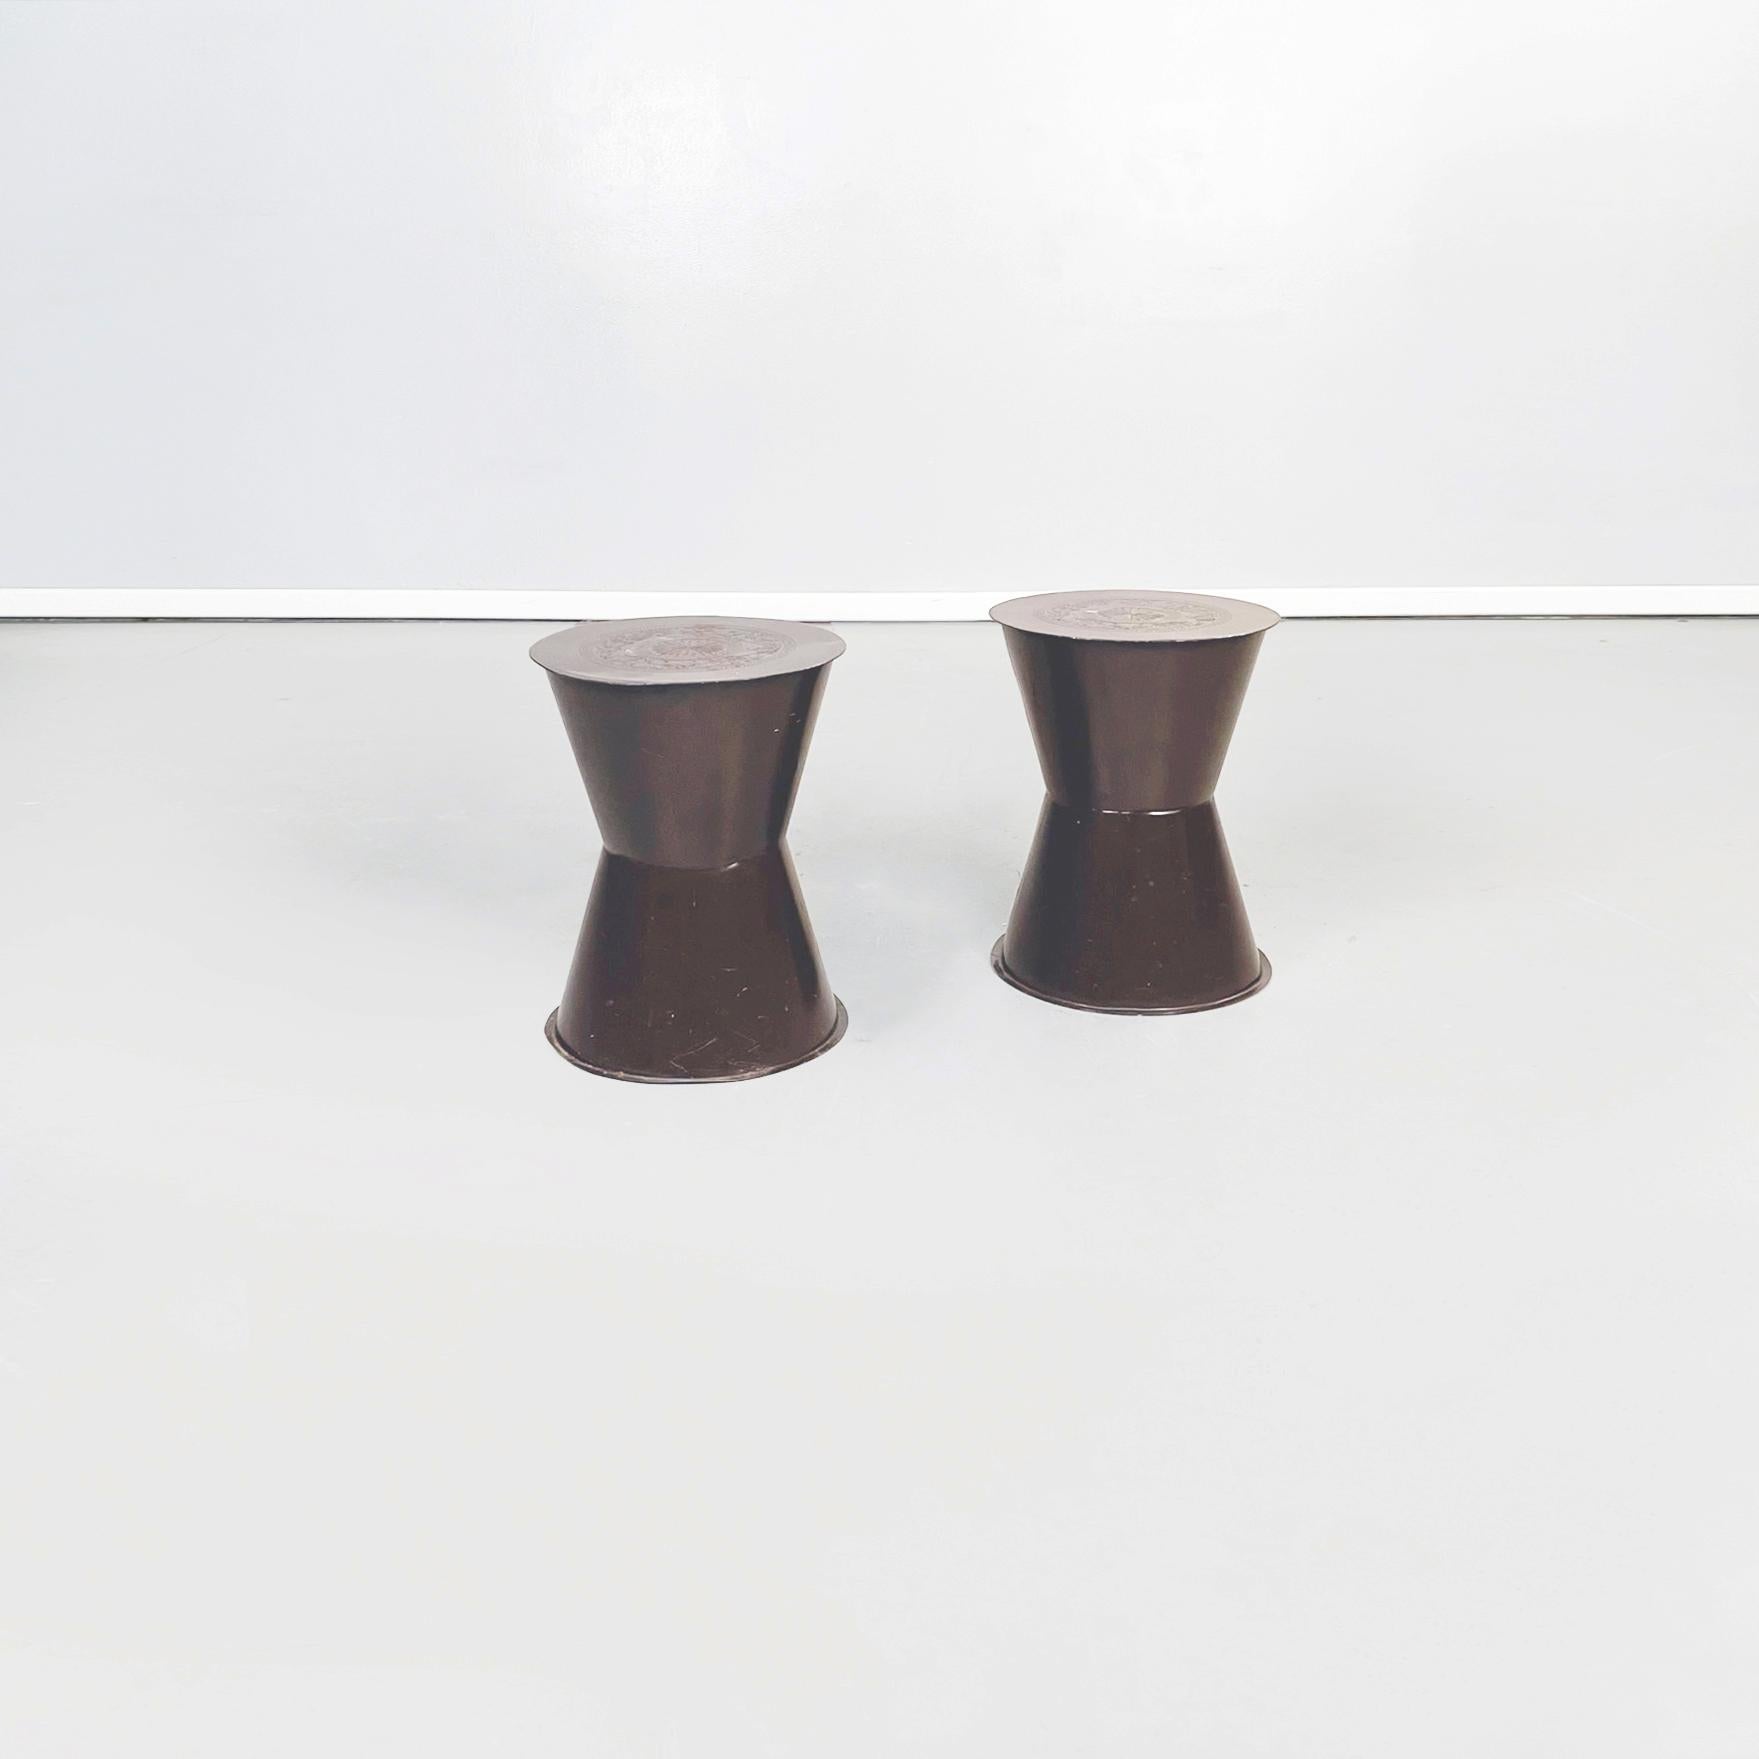 Asian Modern Ethnic Table and Stools in Brown Metal with Drawing, 1990s For Sale 6